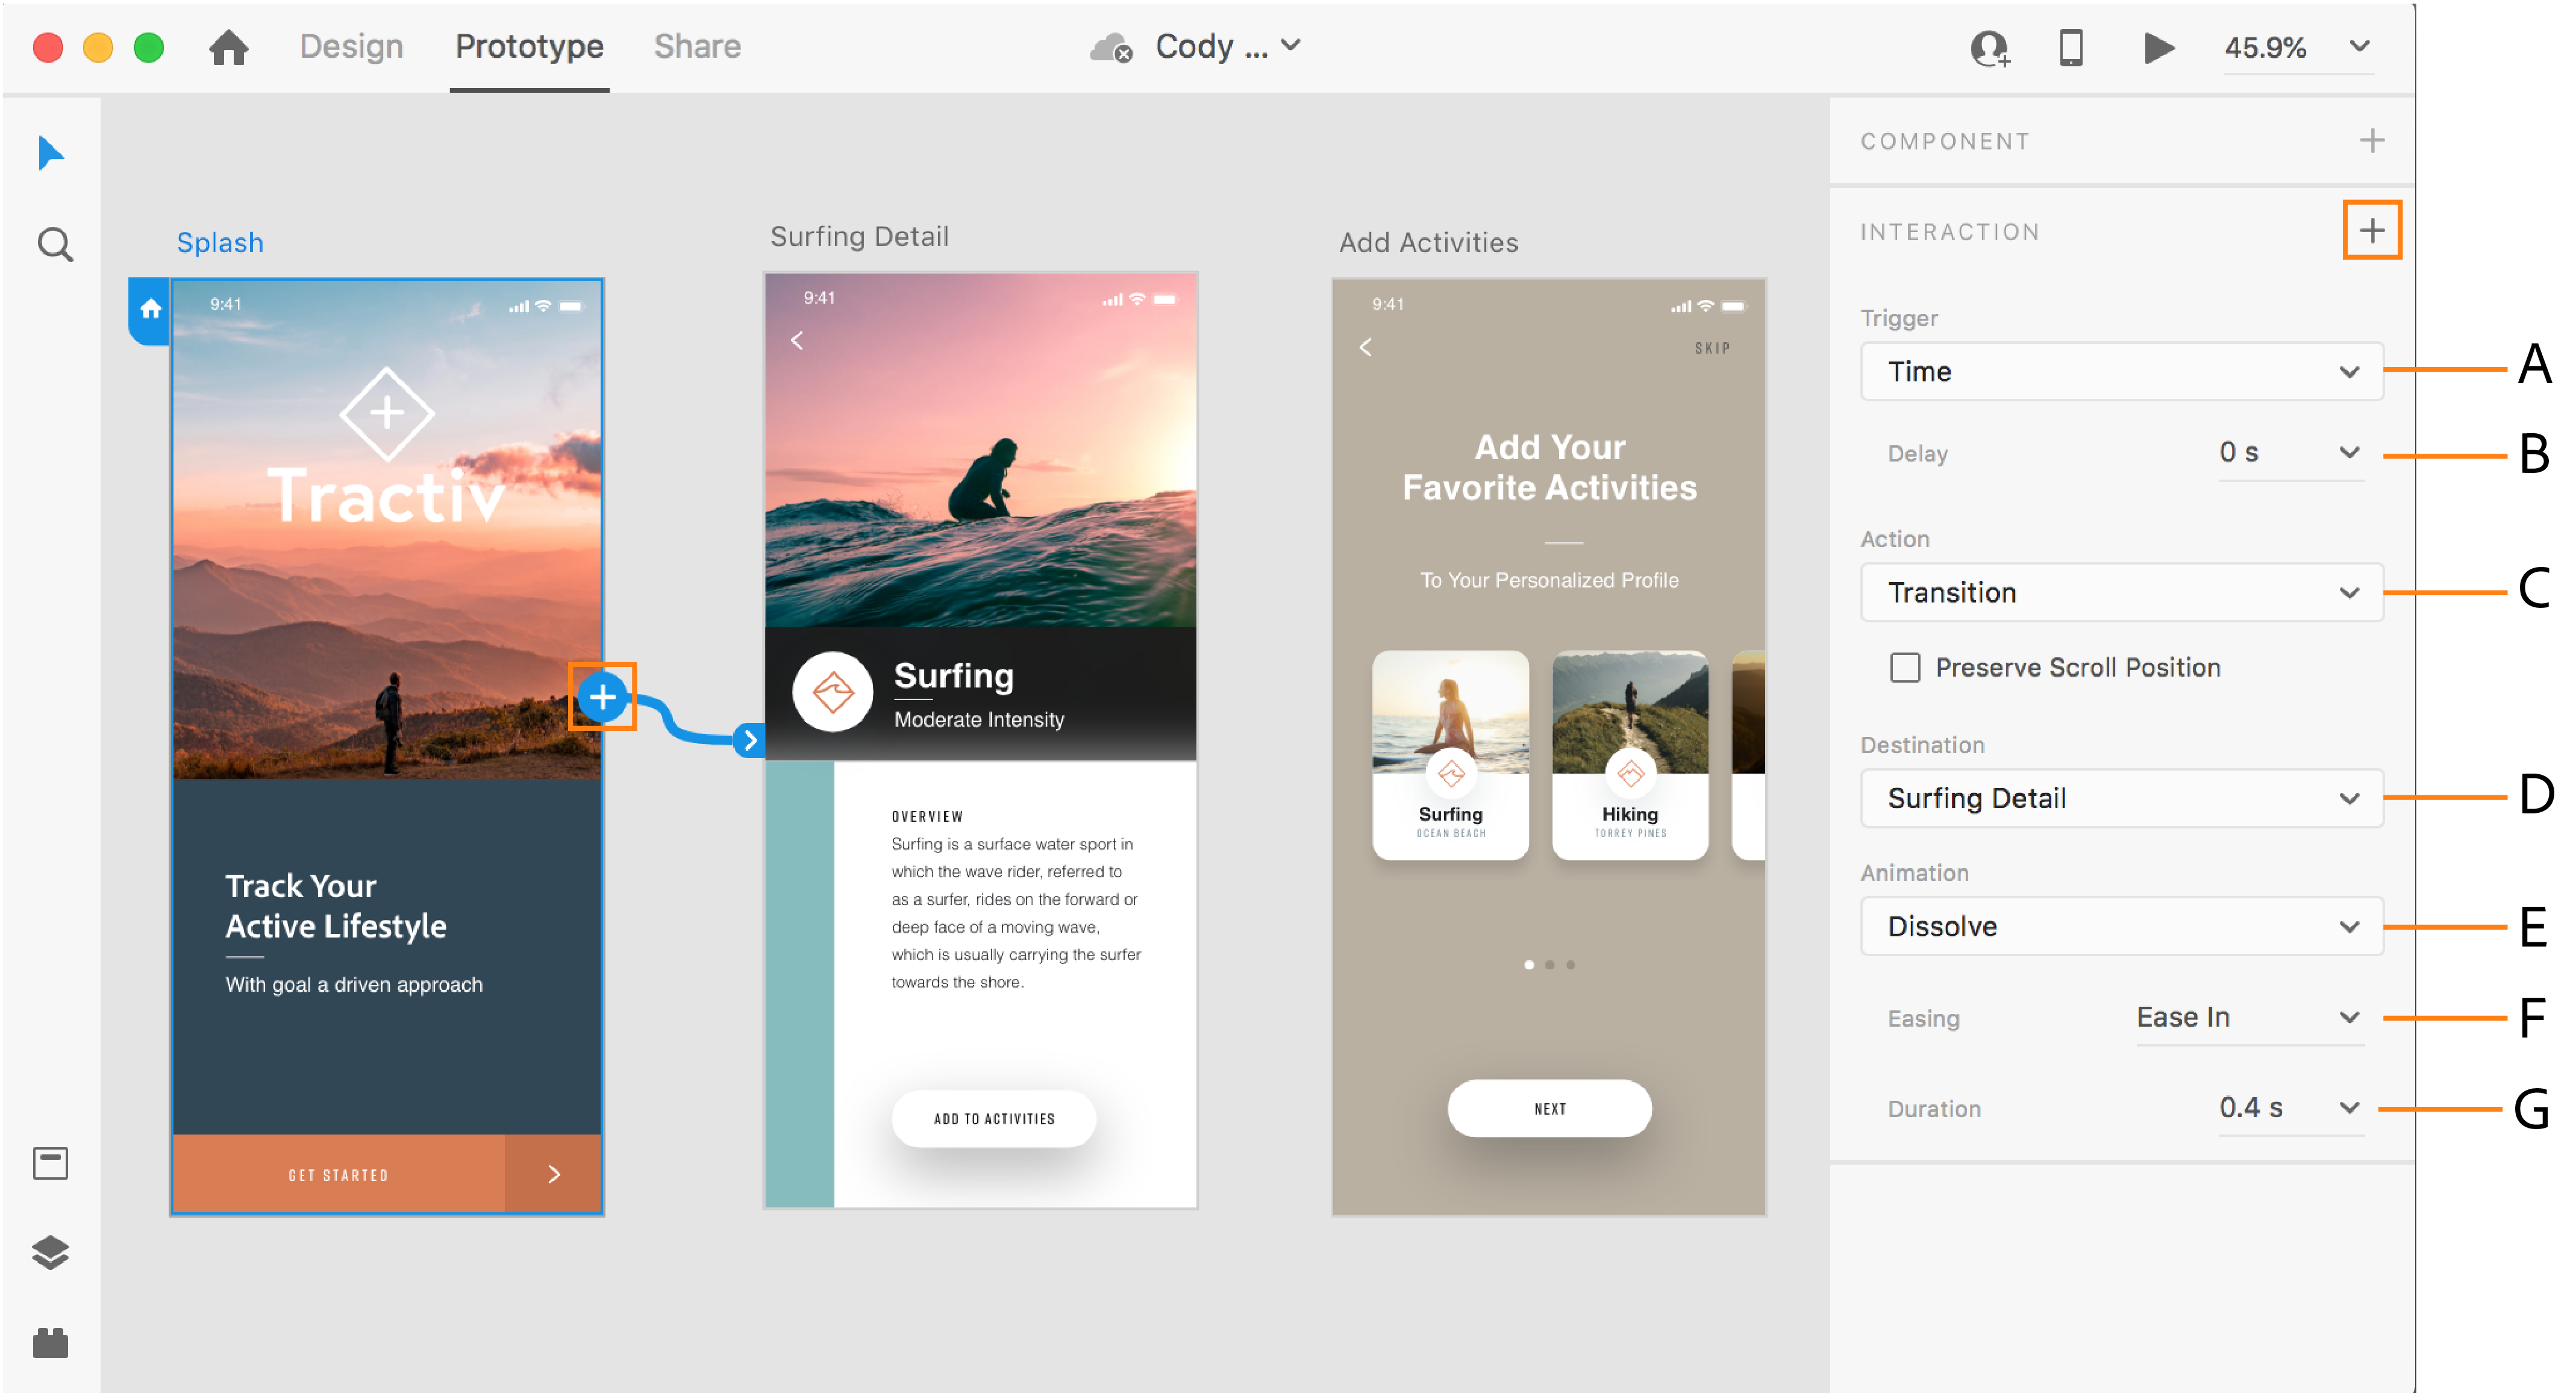 Adobe XD 35.2.12 (x64) Pre-Activated Application Full Version